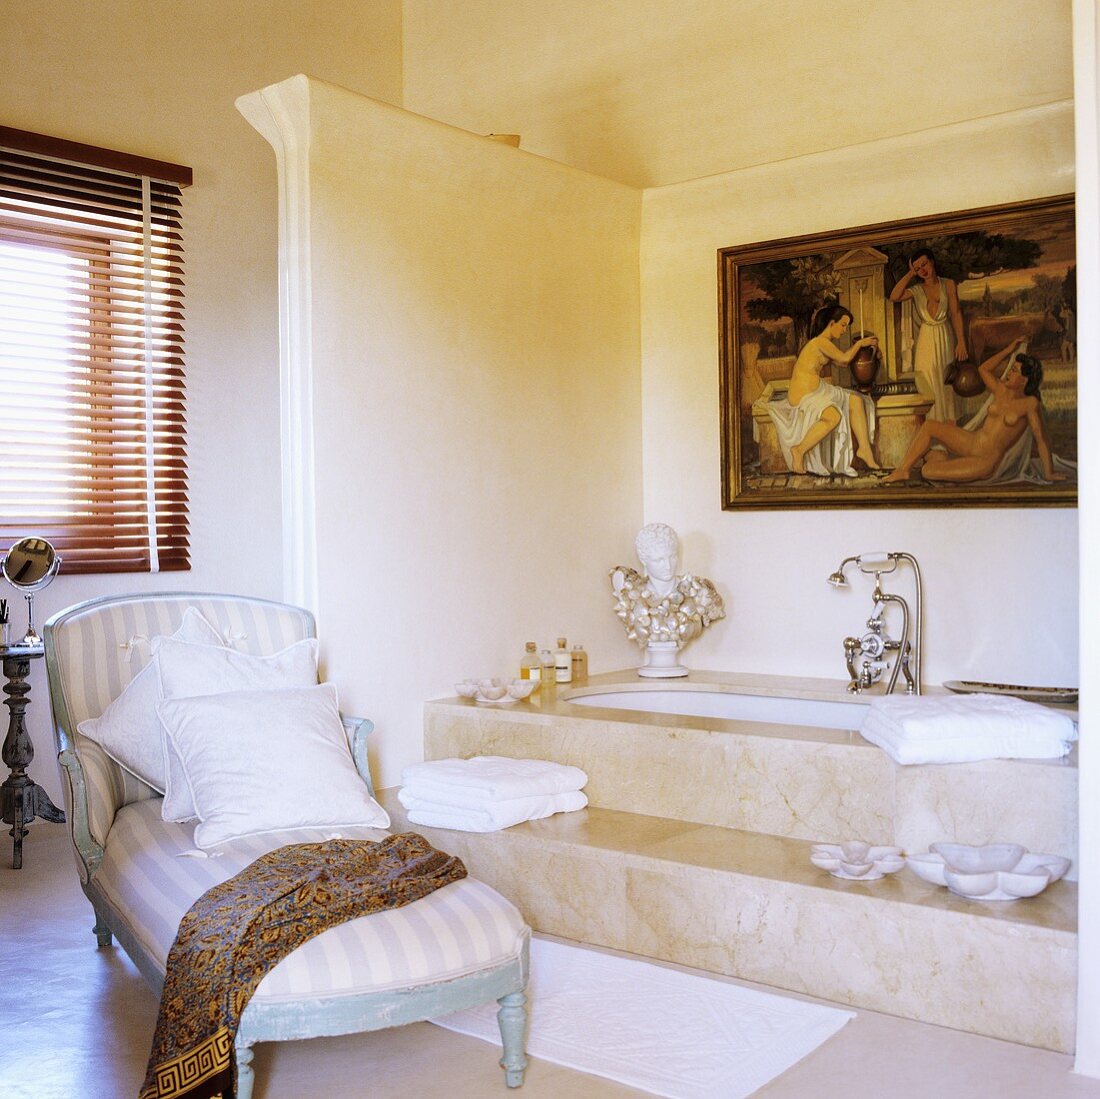 A bathroom with a chaise longue in front of a marble bathtub with steps